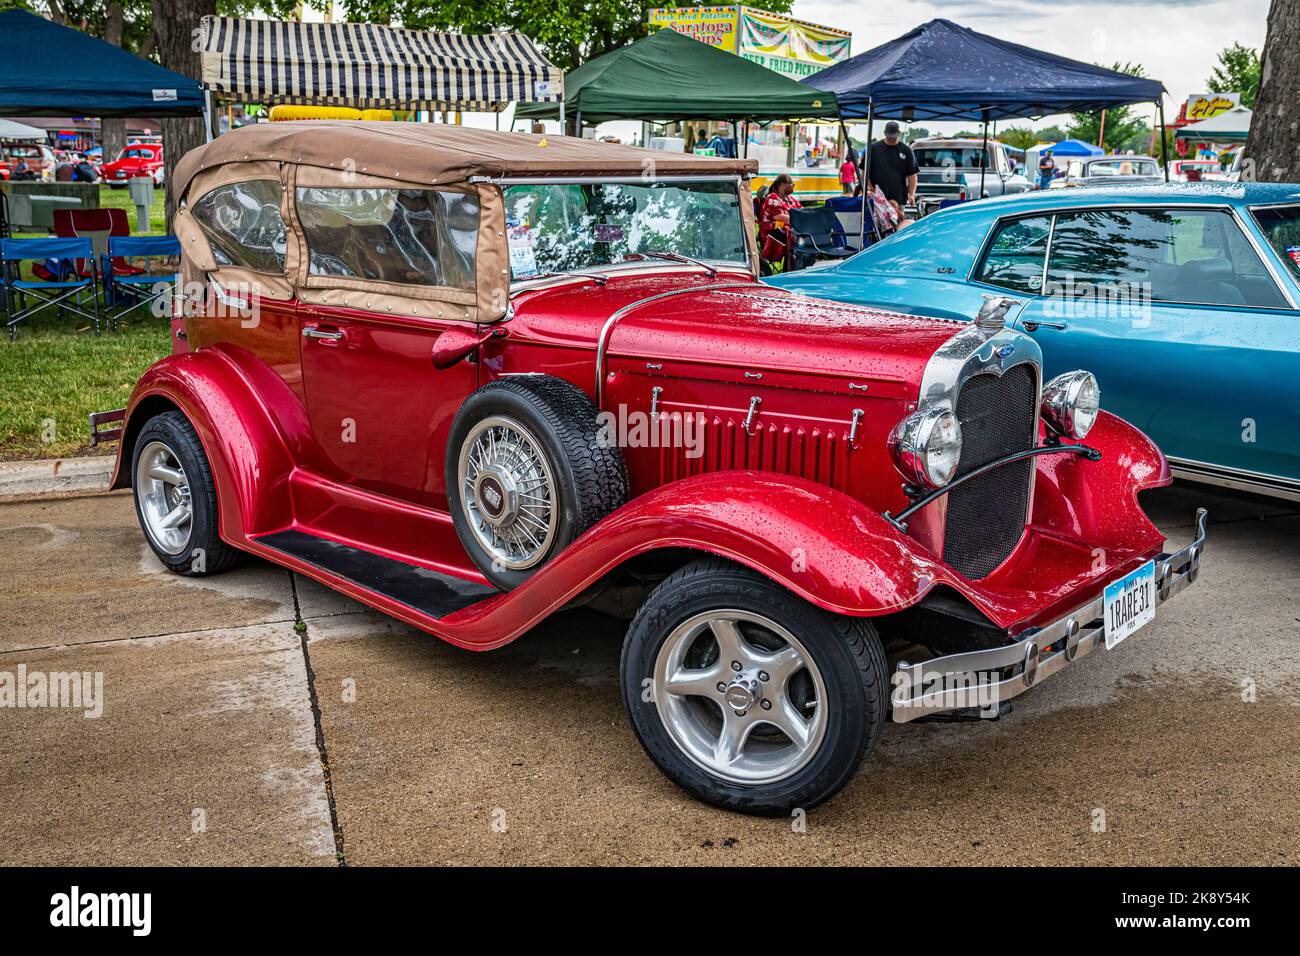 Des Moines, IA - July 01, 2022: High perspective front corner view of a 1931 Ford Model A Phaeton at a local car show. Stock Photo